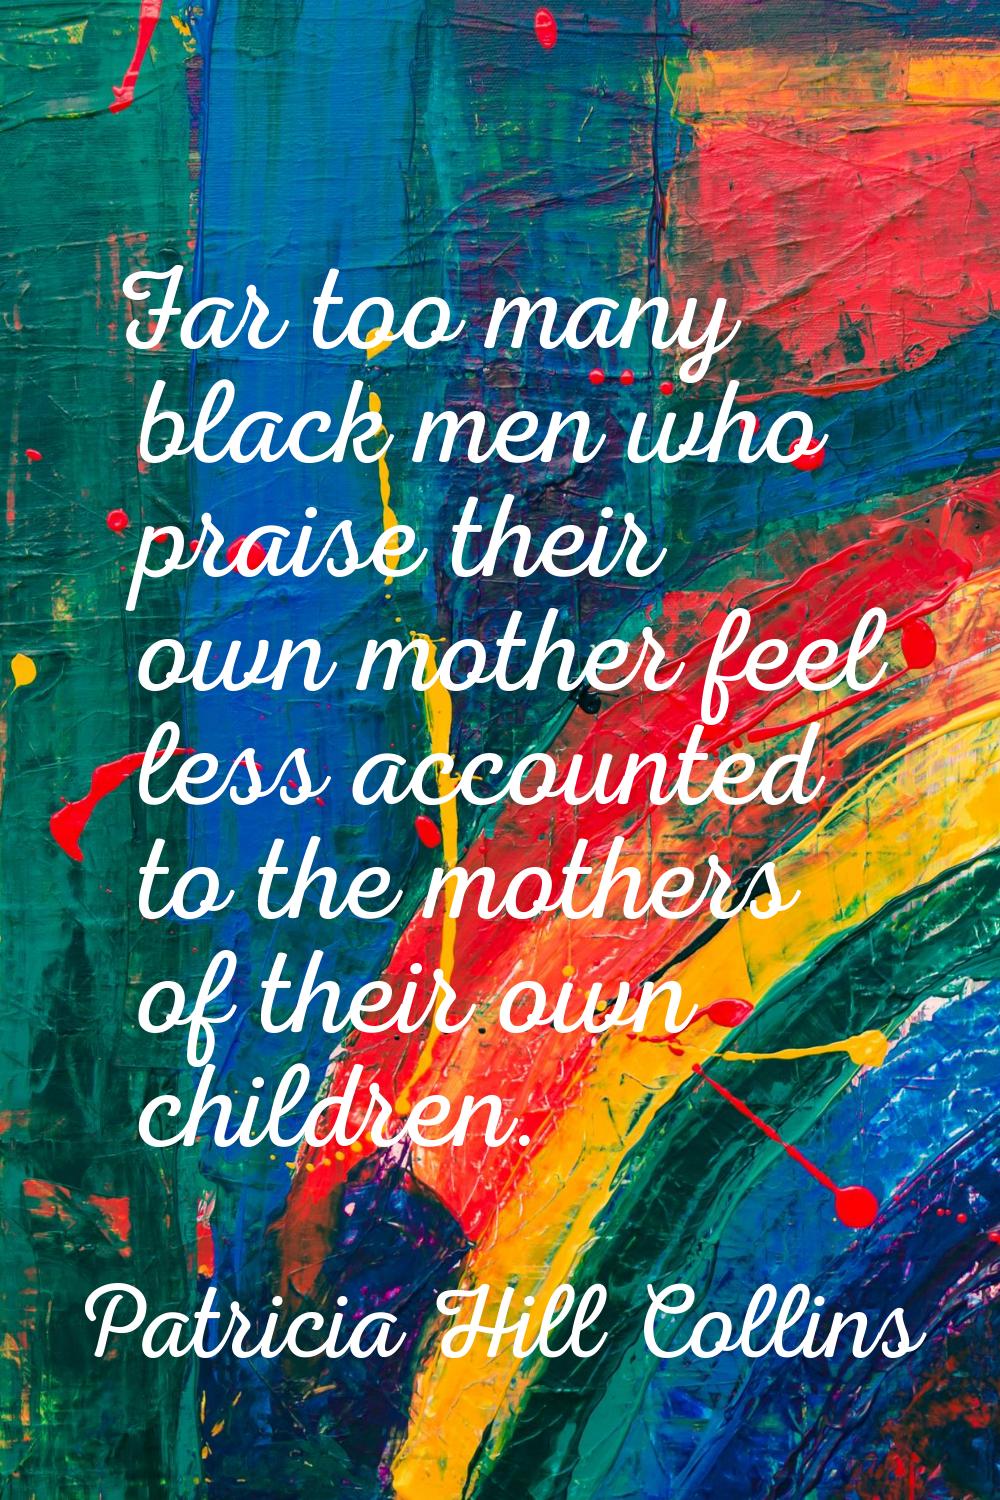 Far too many black men who praise their own mother feel less accounted to the mothers of their own 